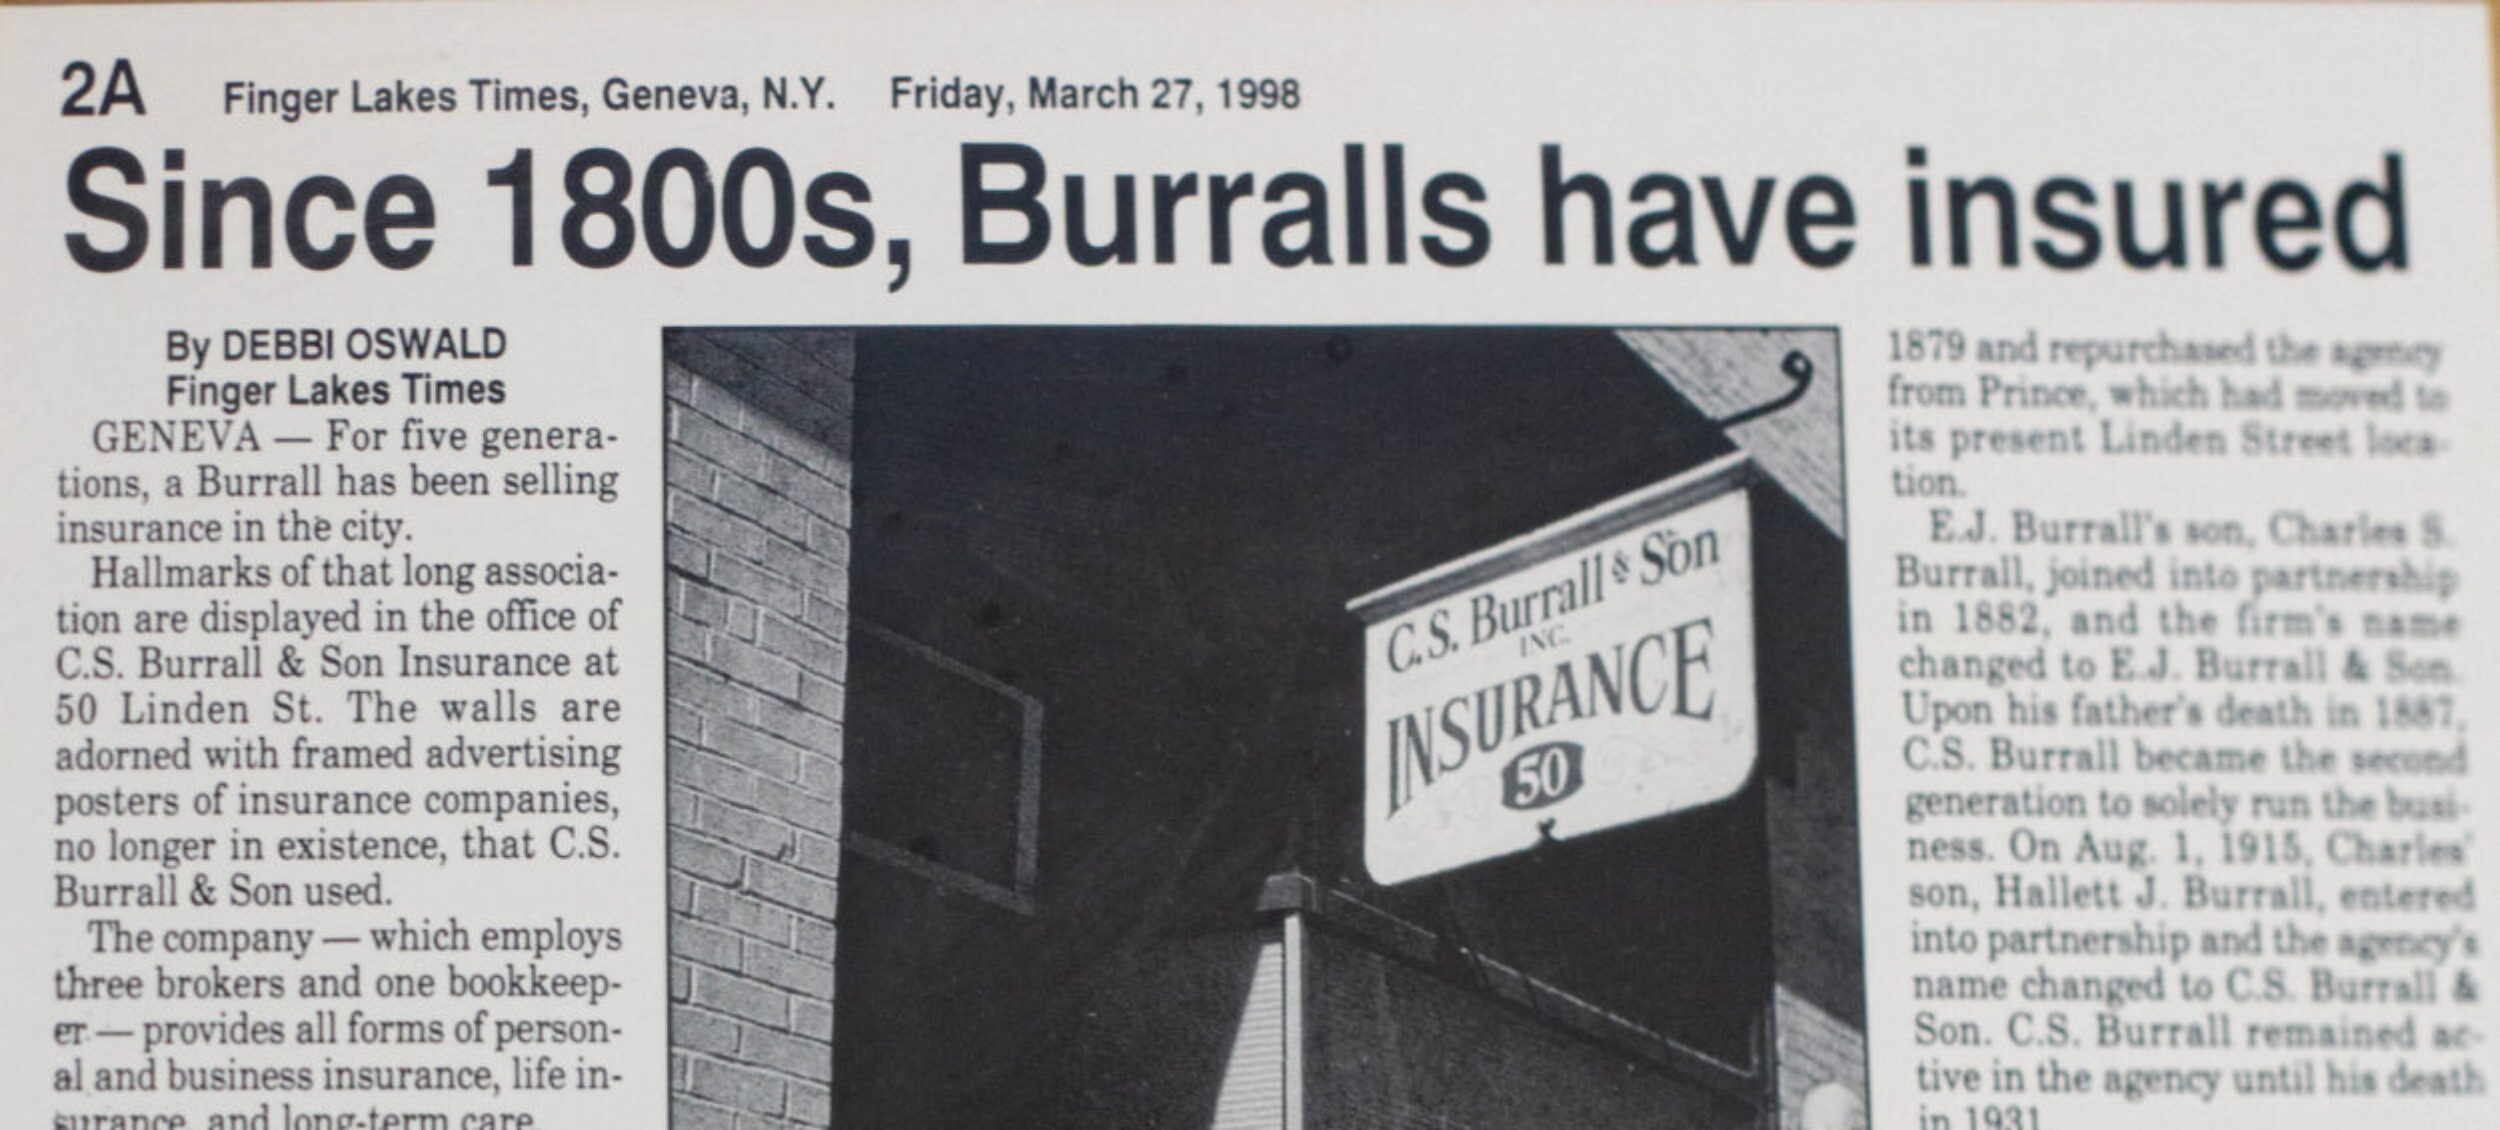 Since 1800s Burralls Have Insured - Finger Lakes Times Article - C.S. Burrall and Son Insurance